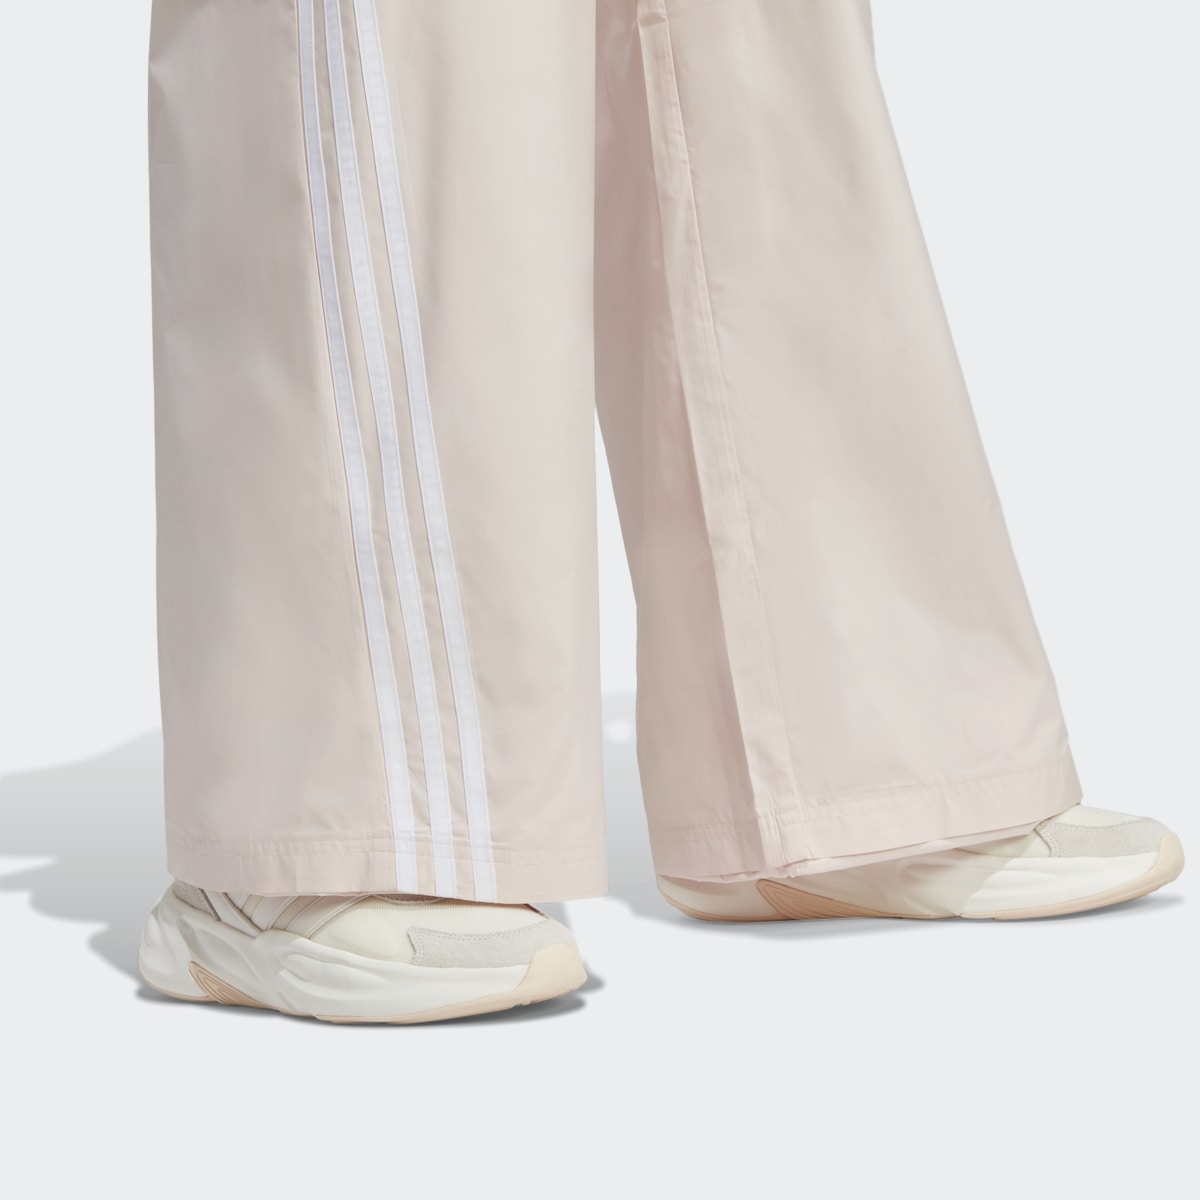 Adidas Future Icons Tracksuit Bottoms. 6